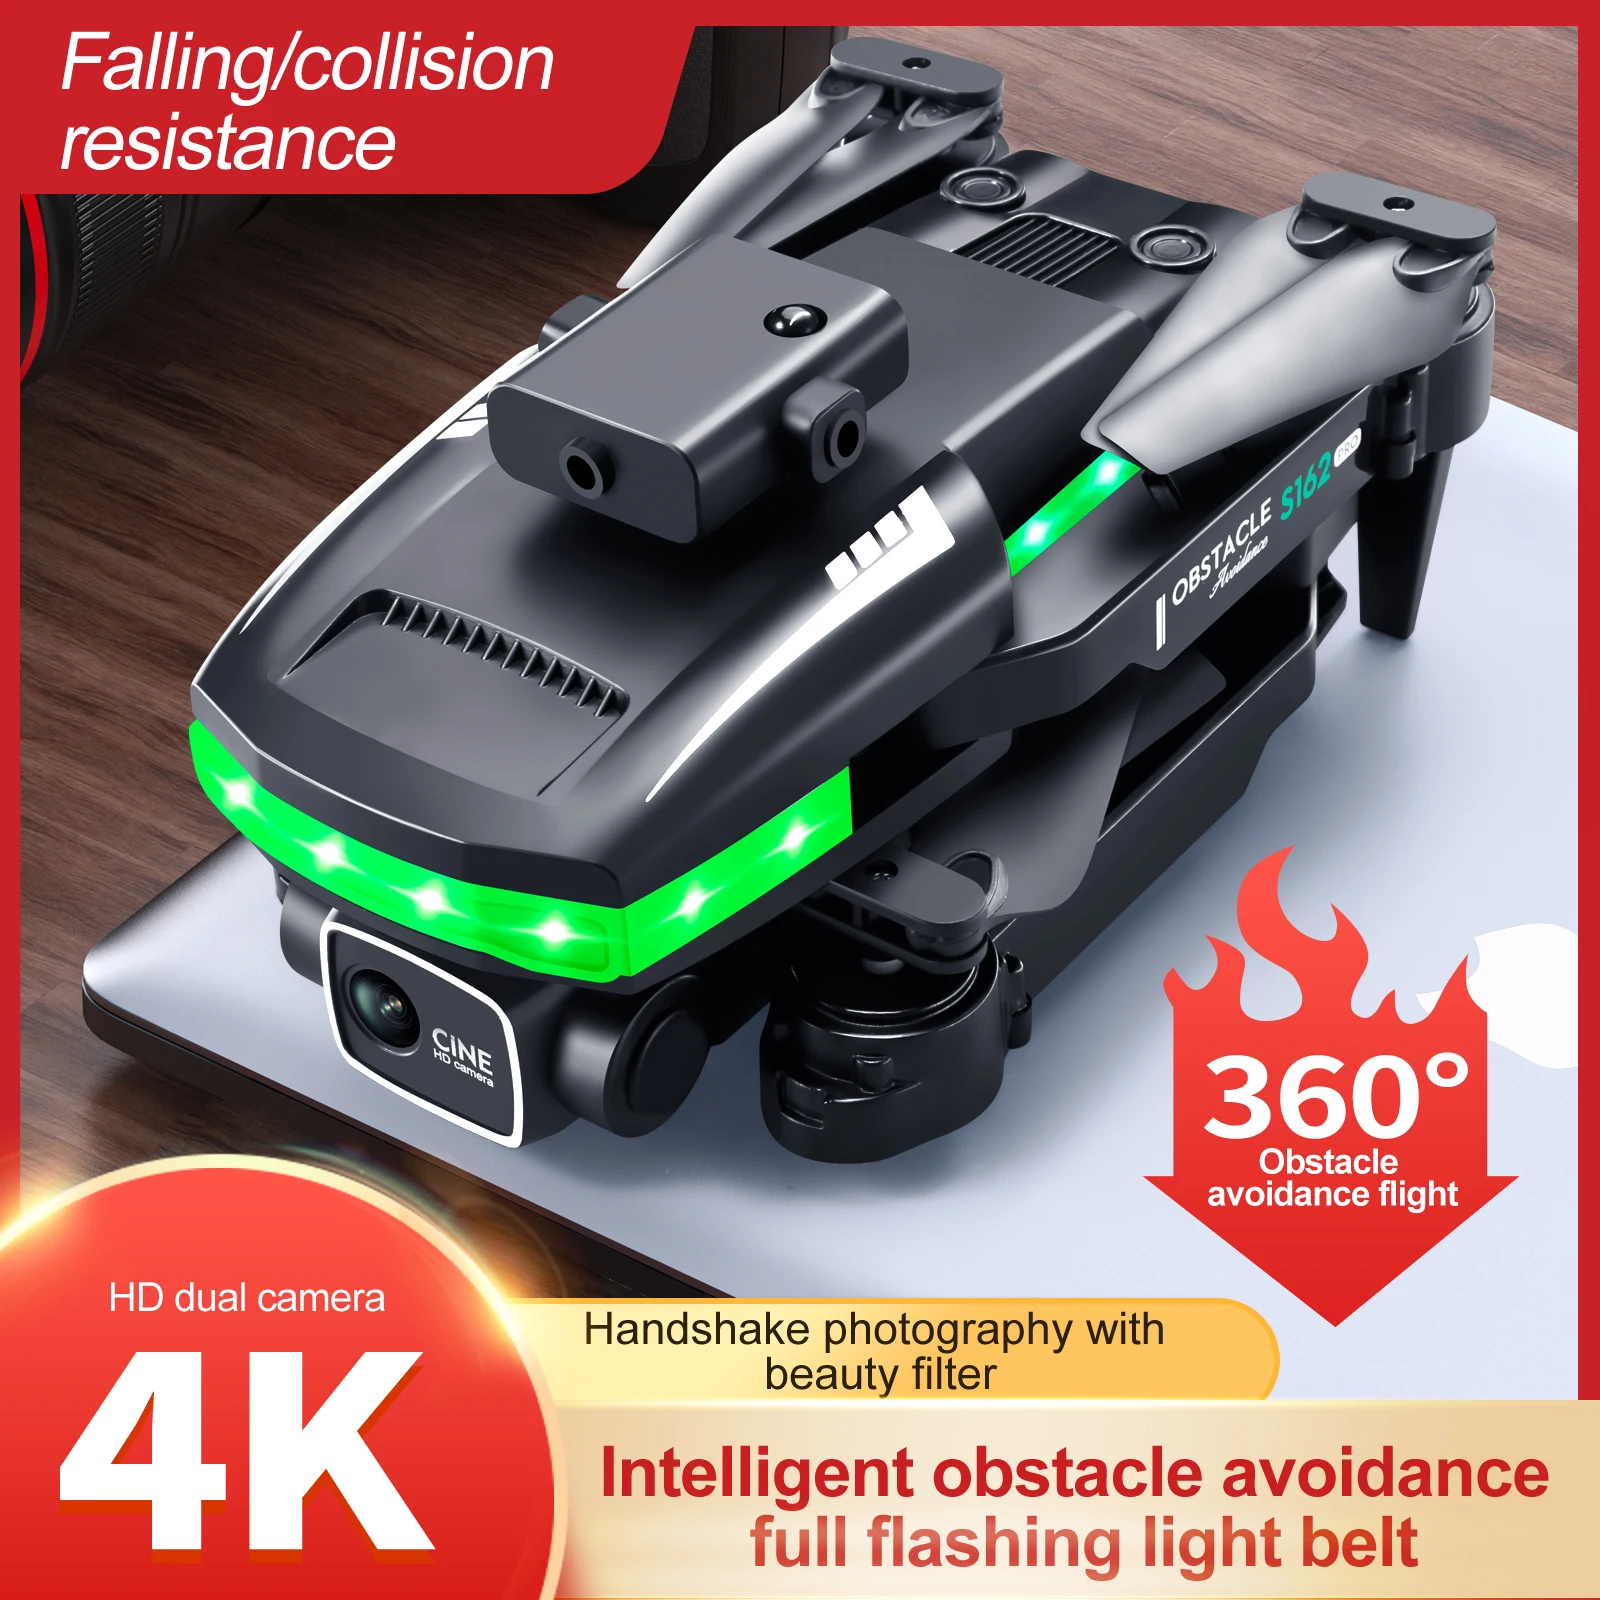 

New S162 Drone 4K Dual Camera 2.4G WIFI FPV Colorful Lighting 360° Obstacle Avoidance Folding Quadcopter Remote Control Aircraft